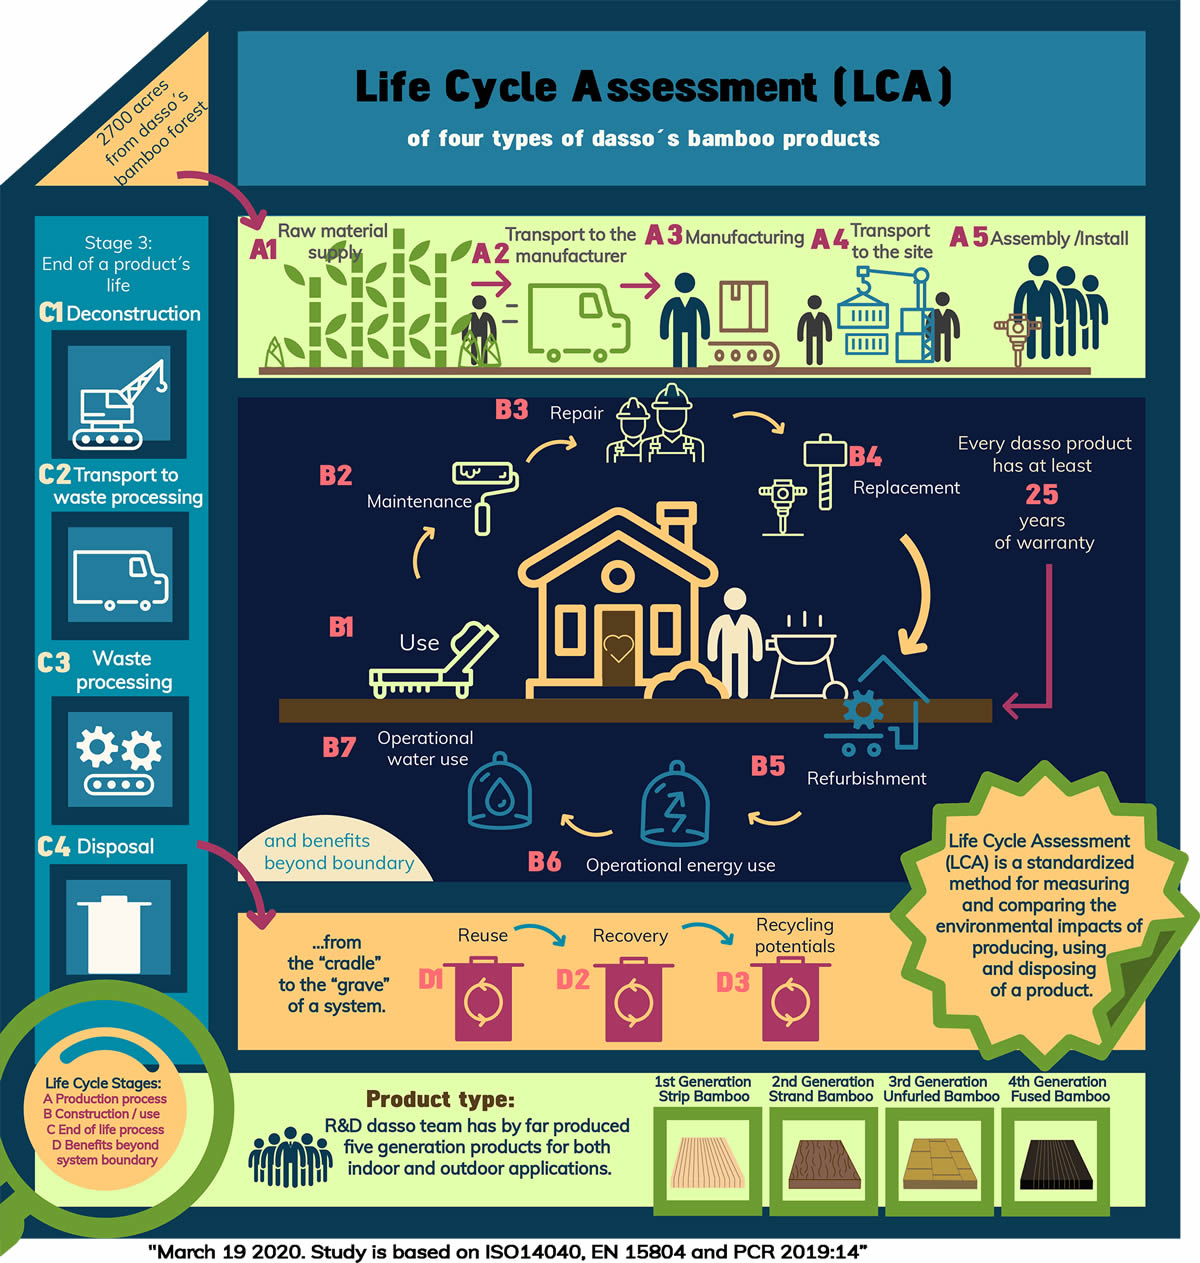 life cycle assessemnt of dassoxTR